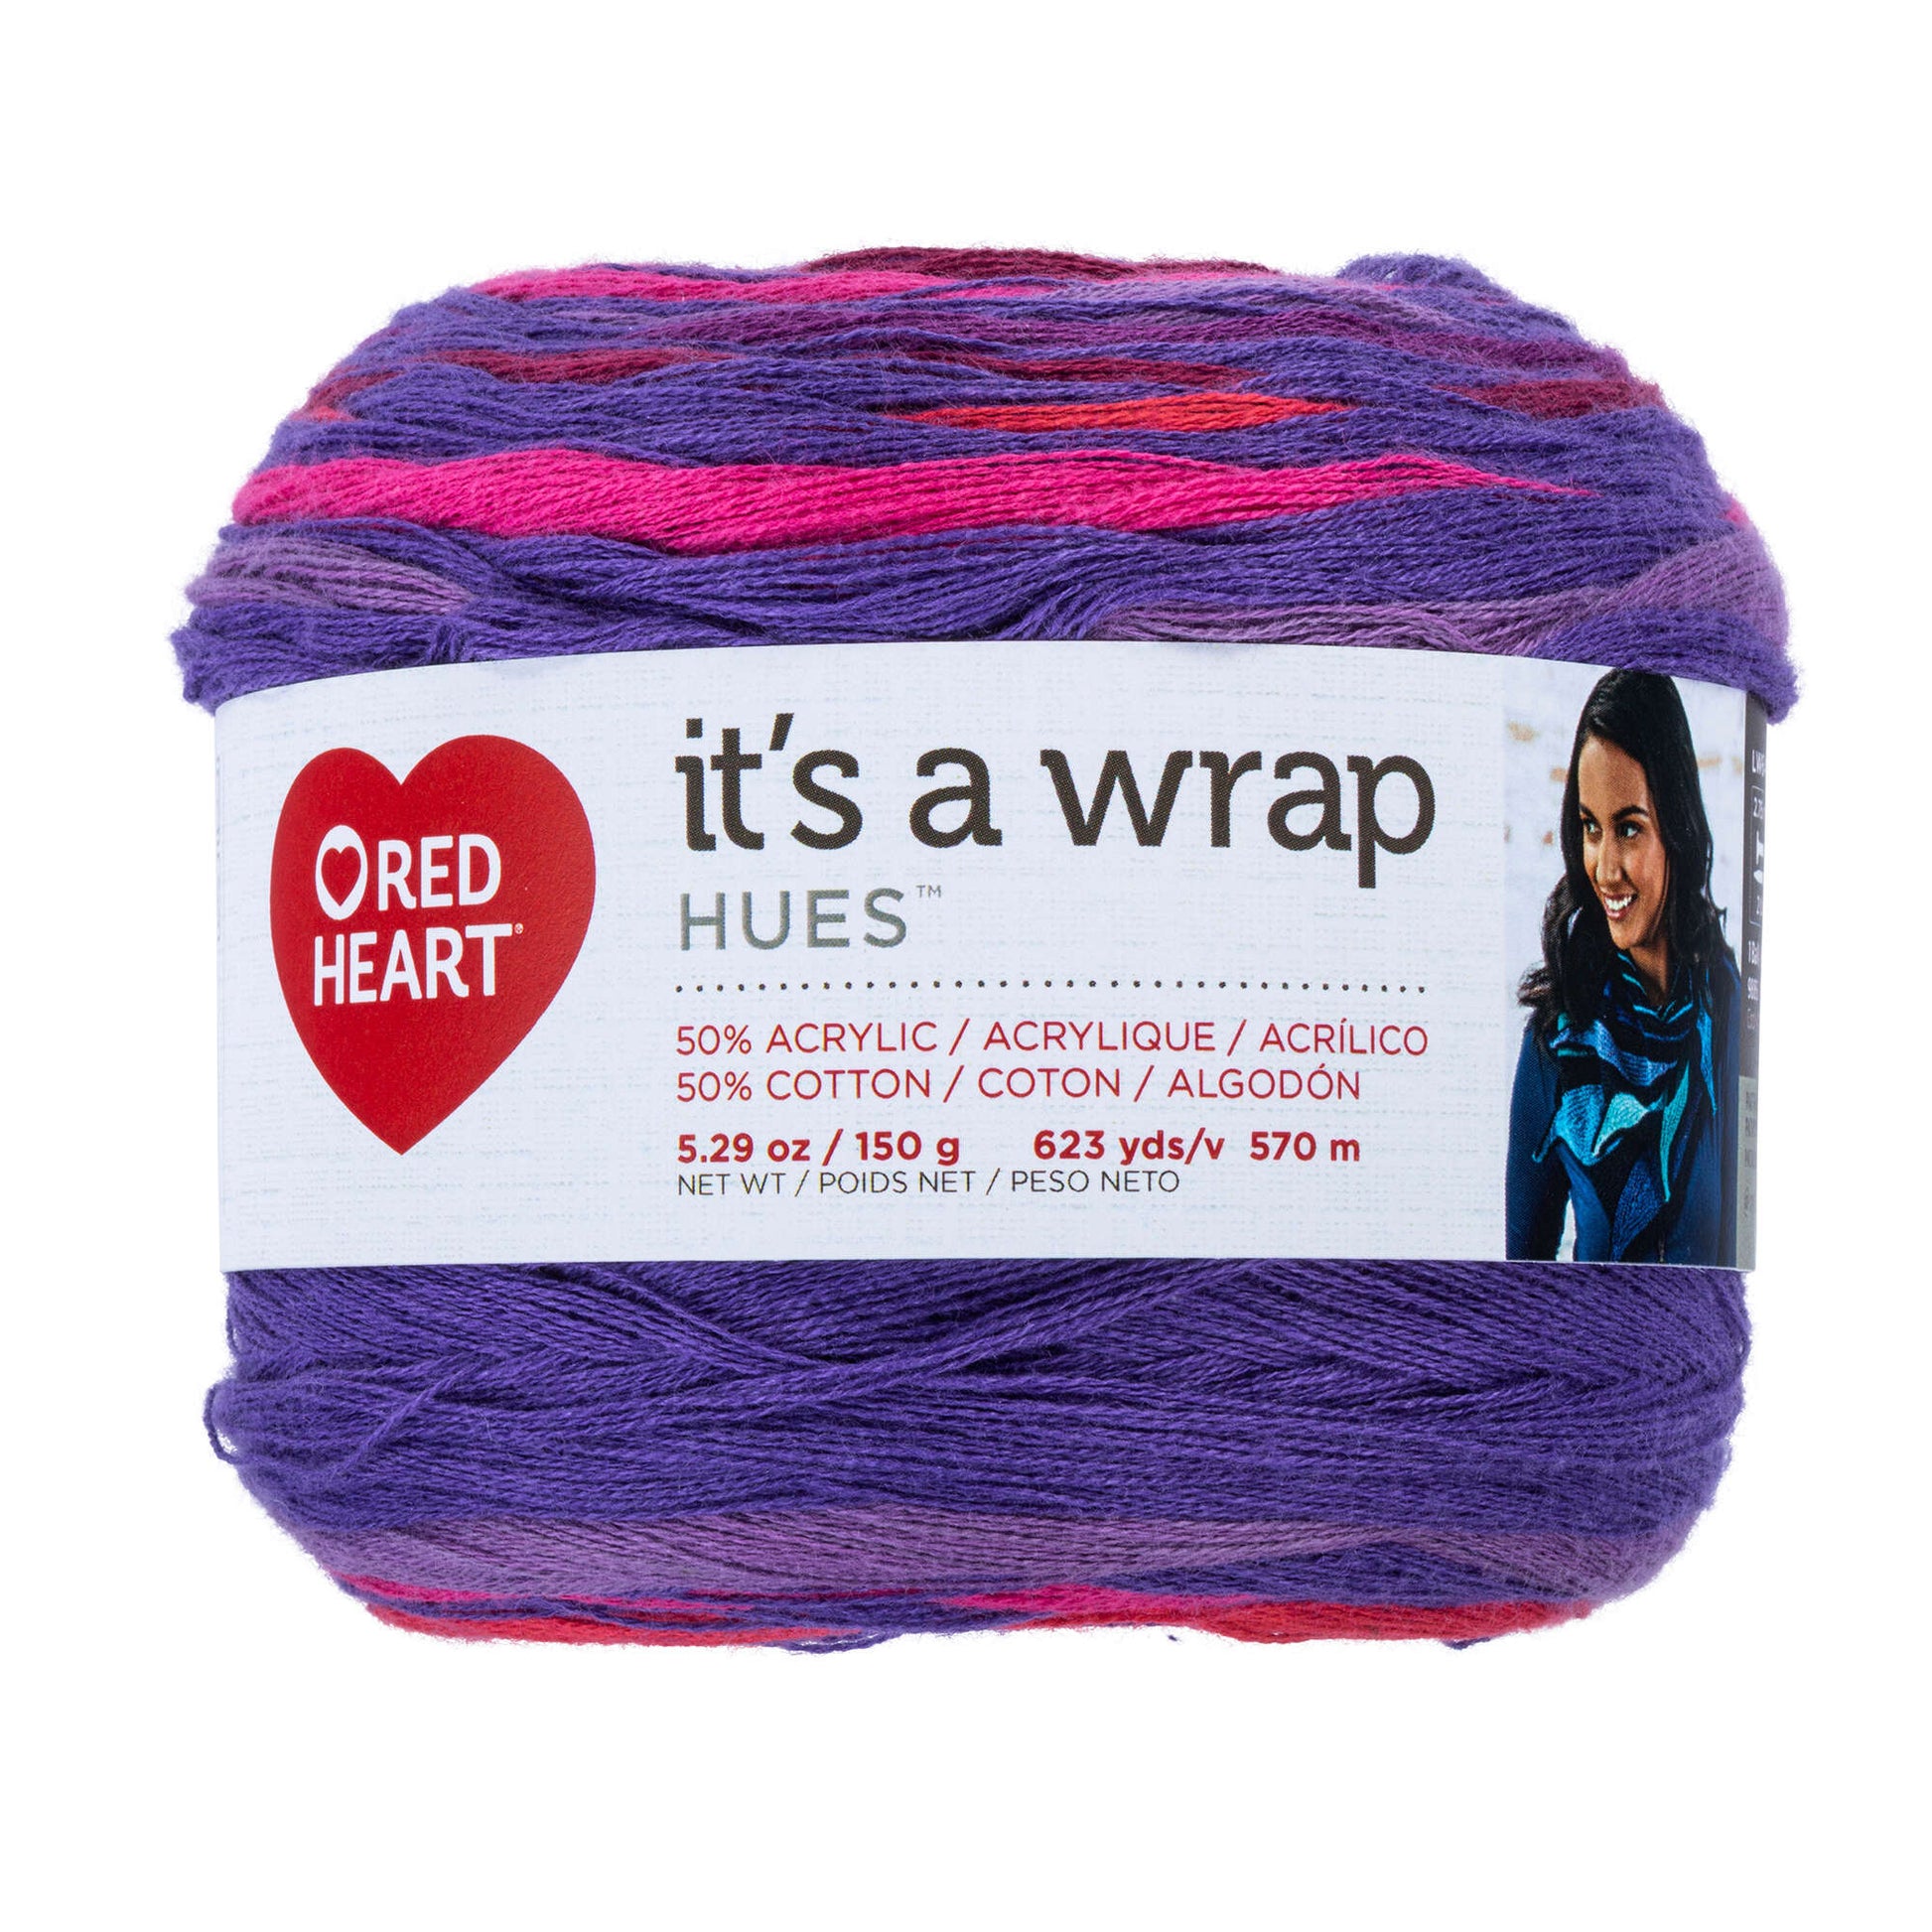 Red Heart It's A Wrap Hues Yarn - Clearance shades